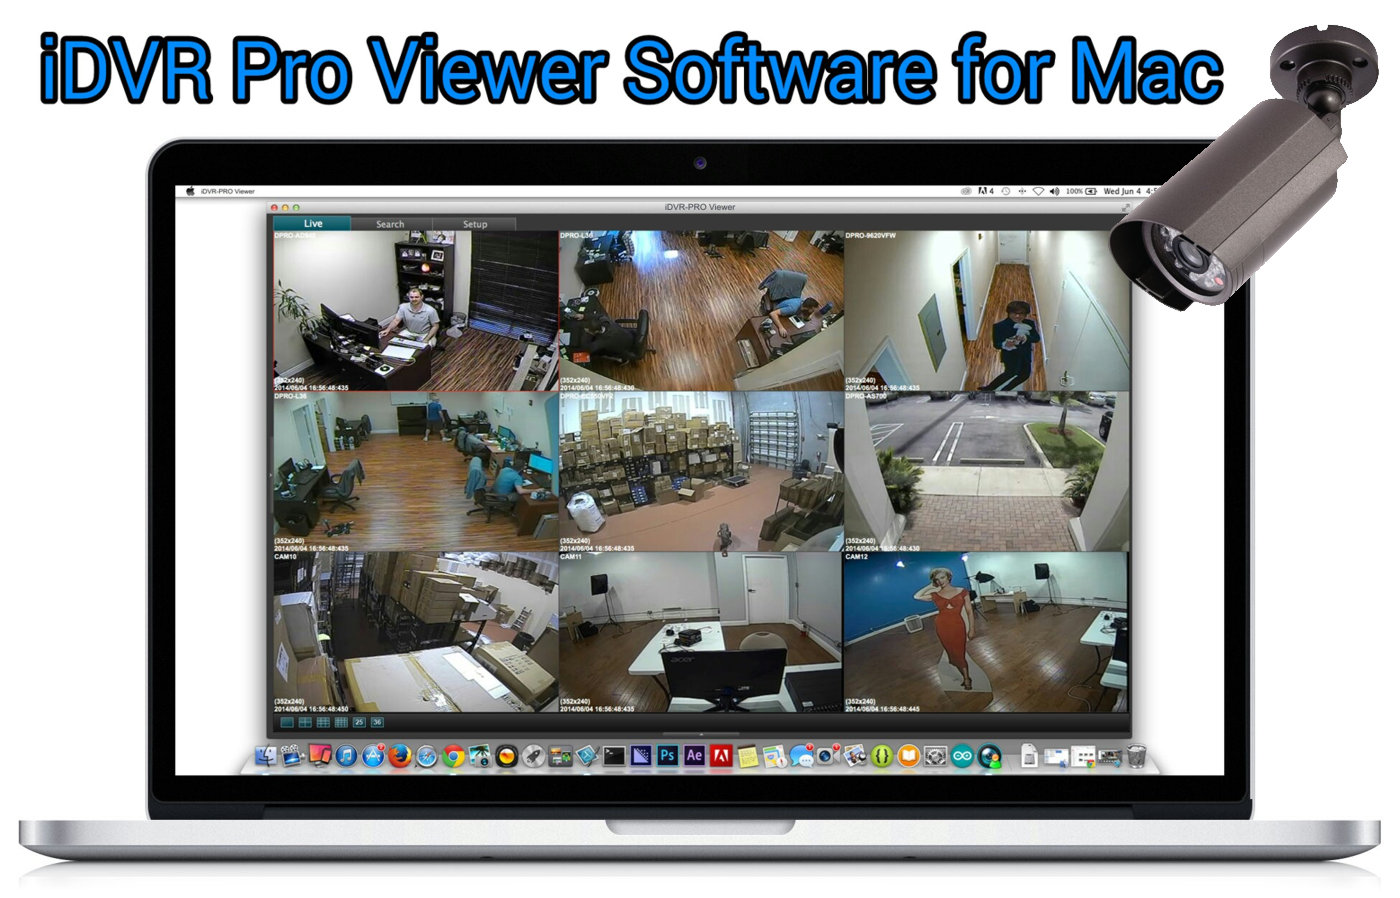 Cctv camera viewer software for blackberry